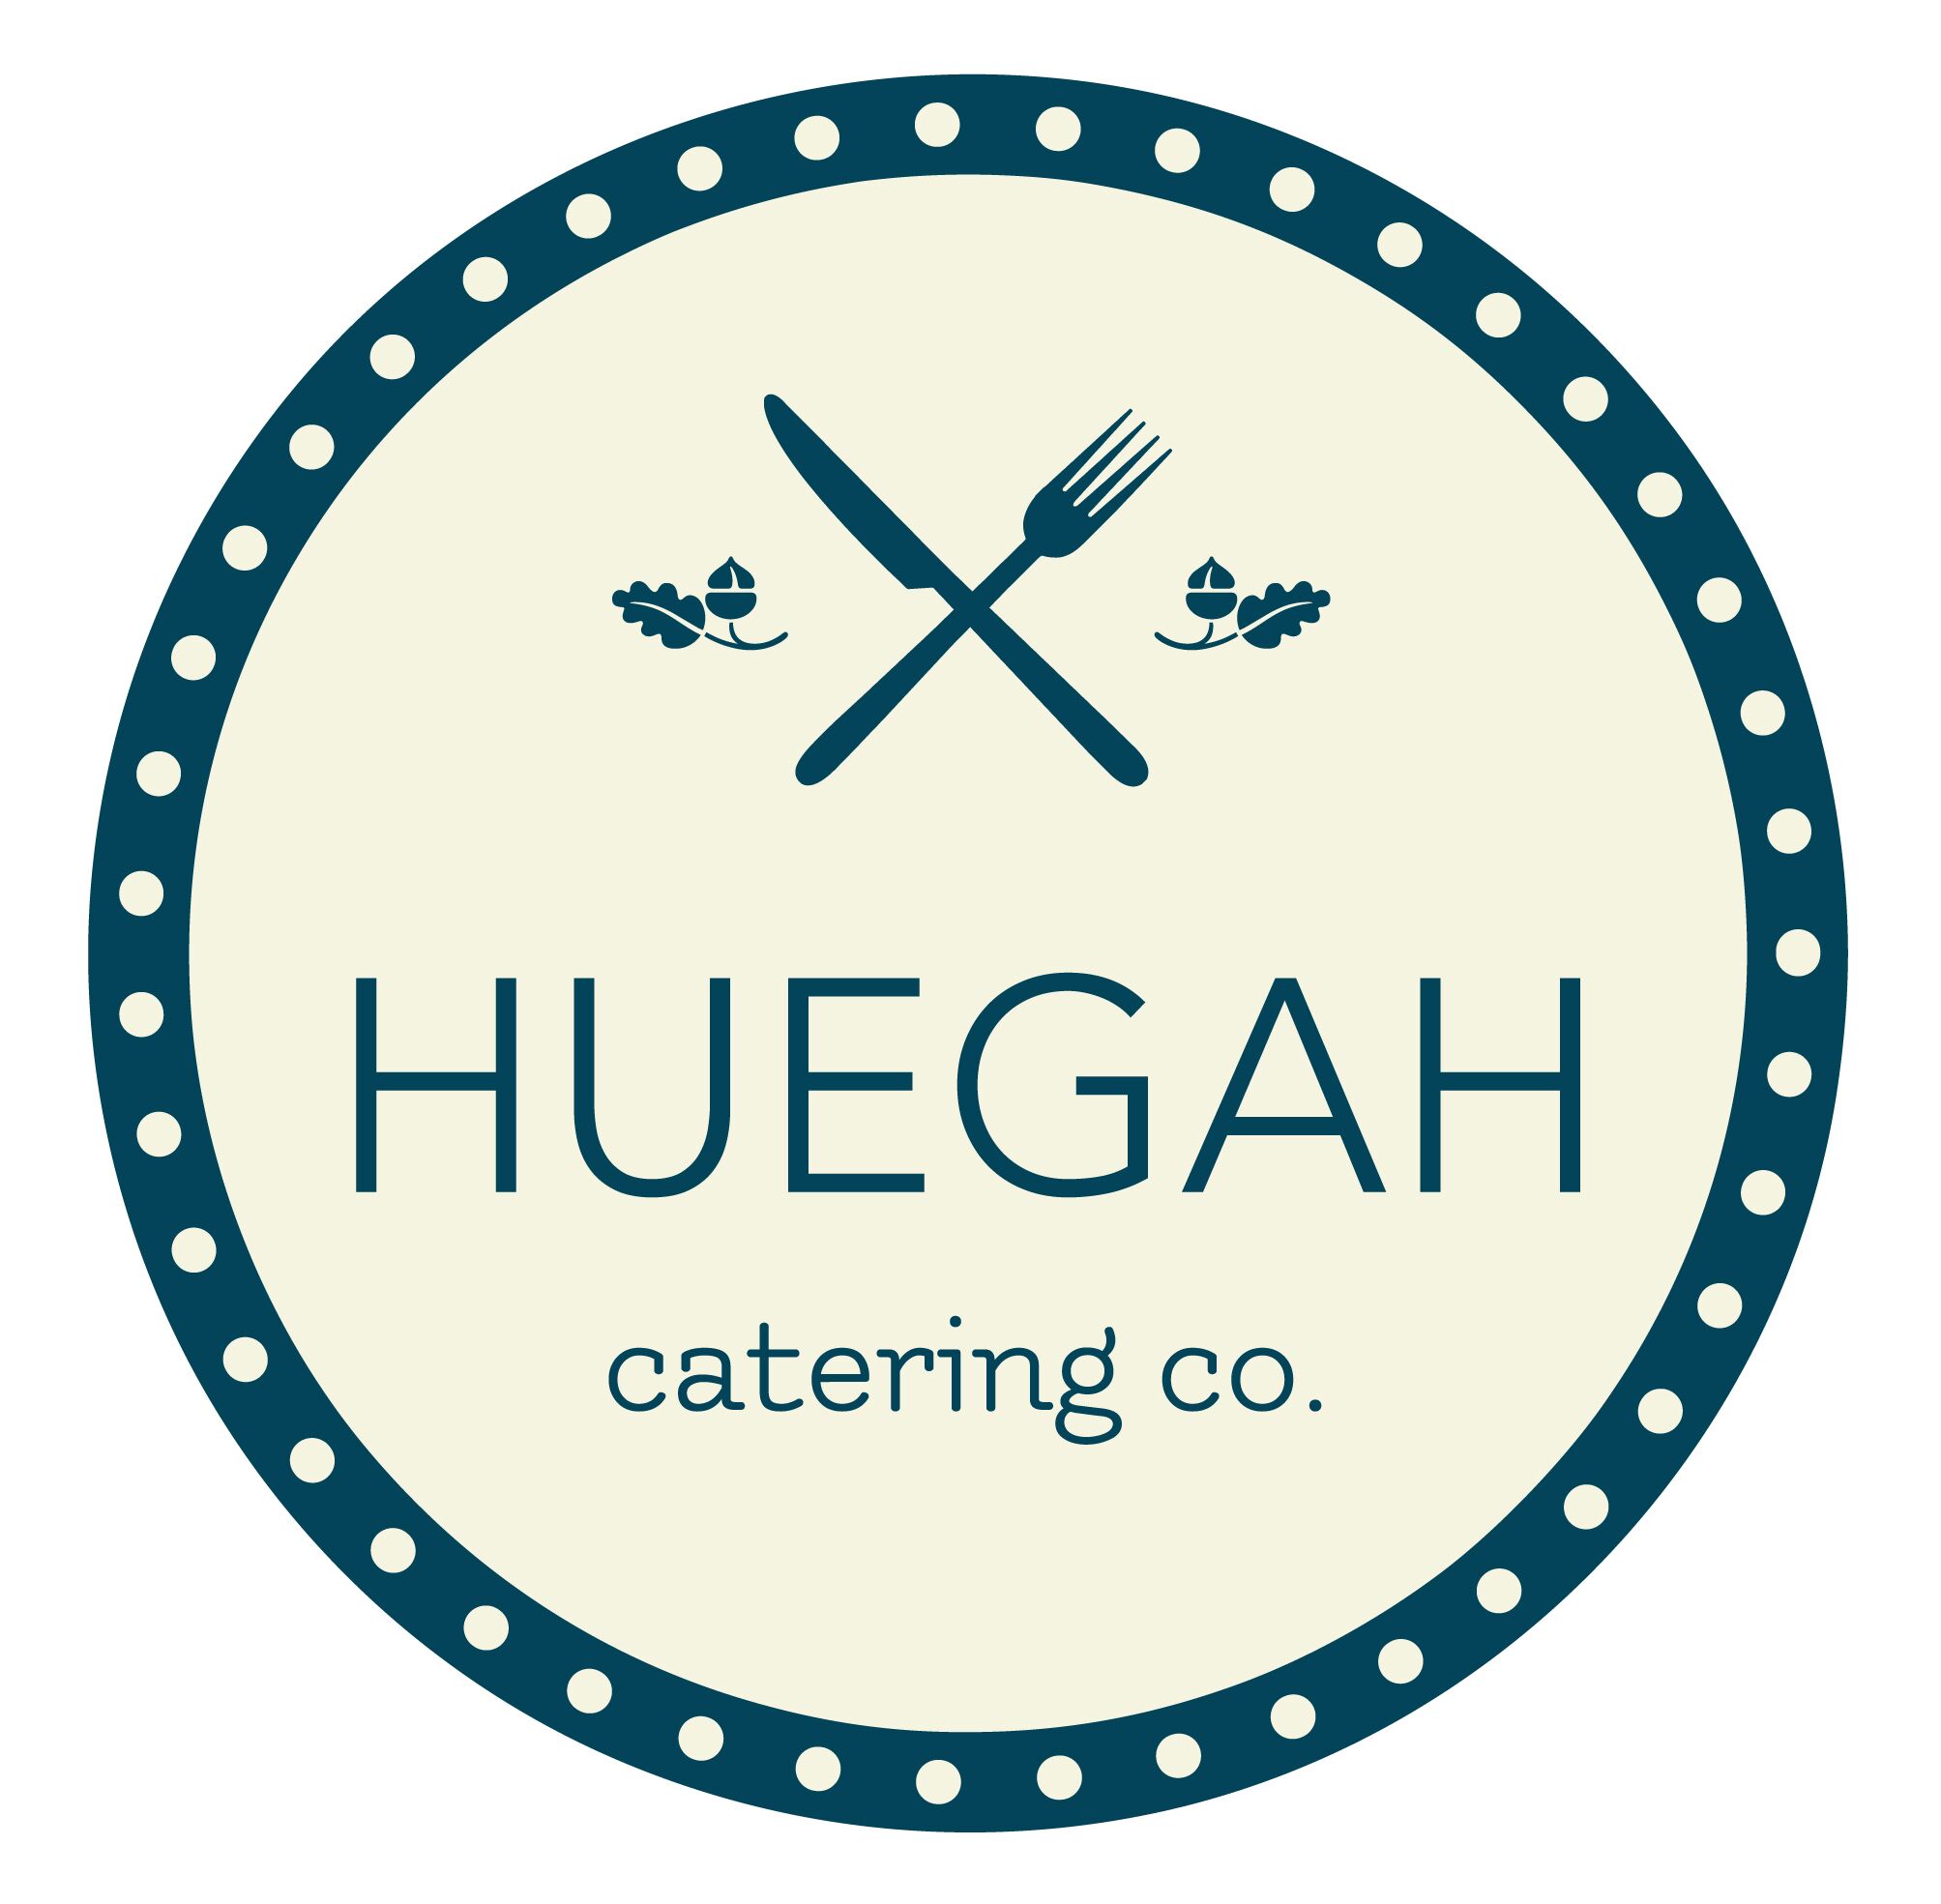 Huegah Catering Co. | Caterers - The Knot